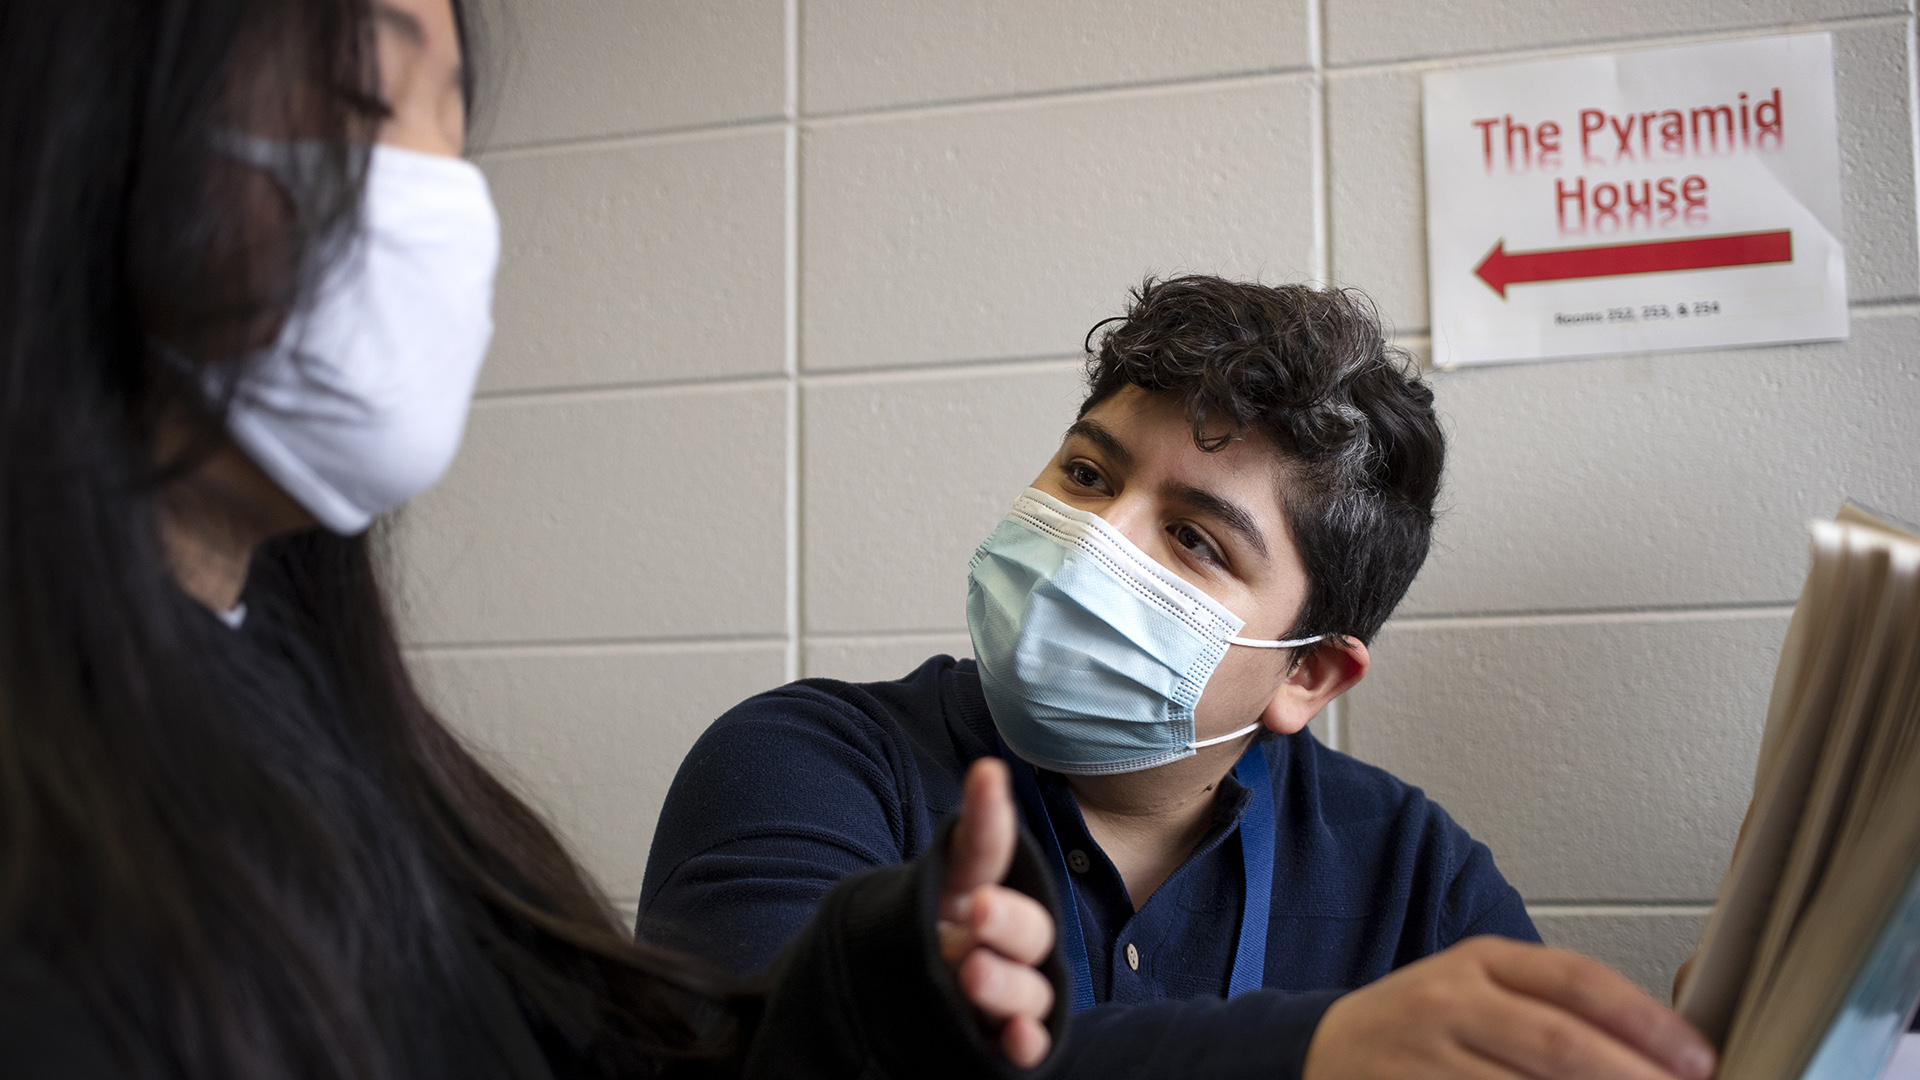 Steph Guzman and a student, both wearing pandemic masks, speak to each other about a book.